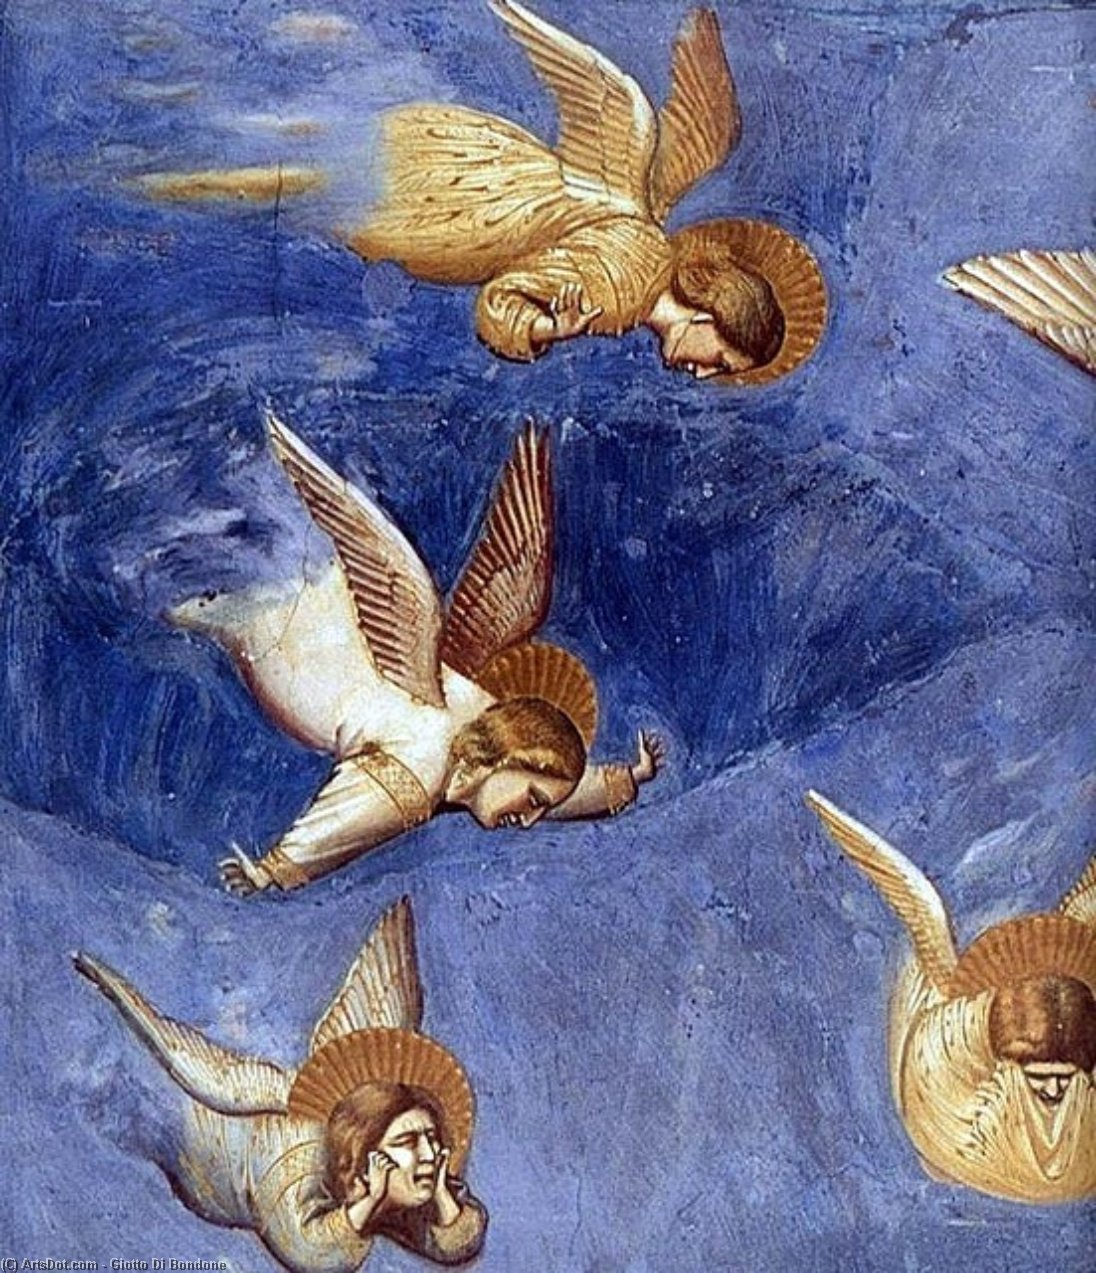 WikiOO.org - 백과 사전 - 회화, 삽화 Giotto Di Bondone - No. 36 Scenes from the Life of Christ: 20. Lamentation ((detail)